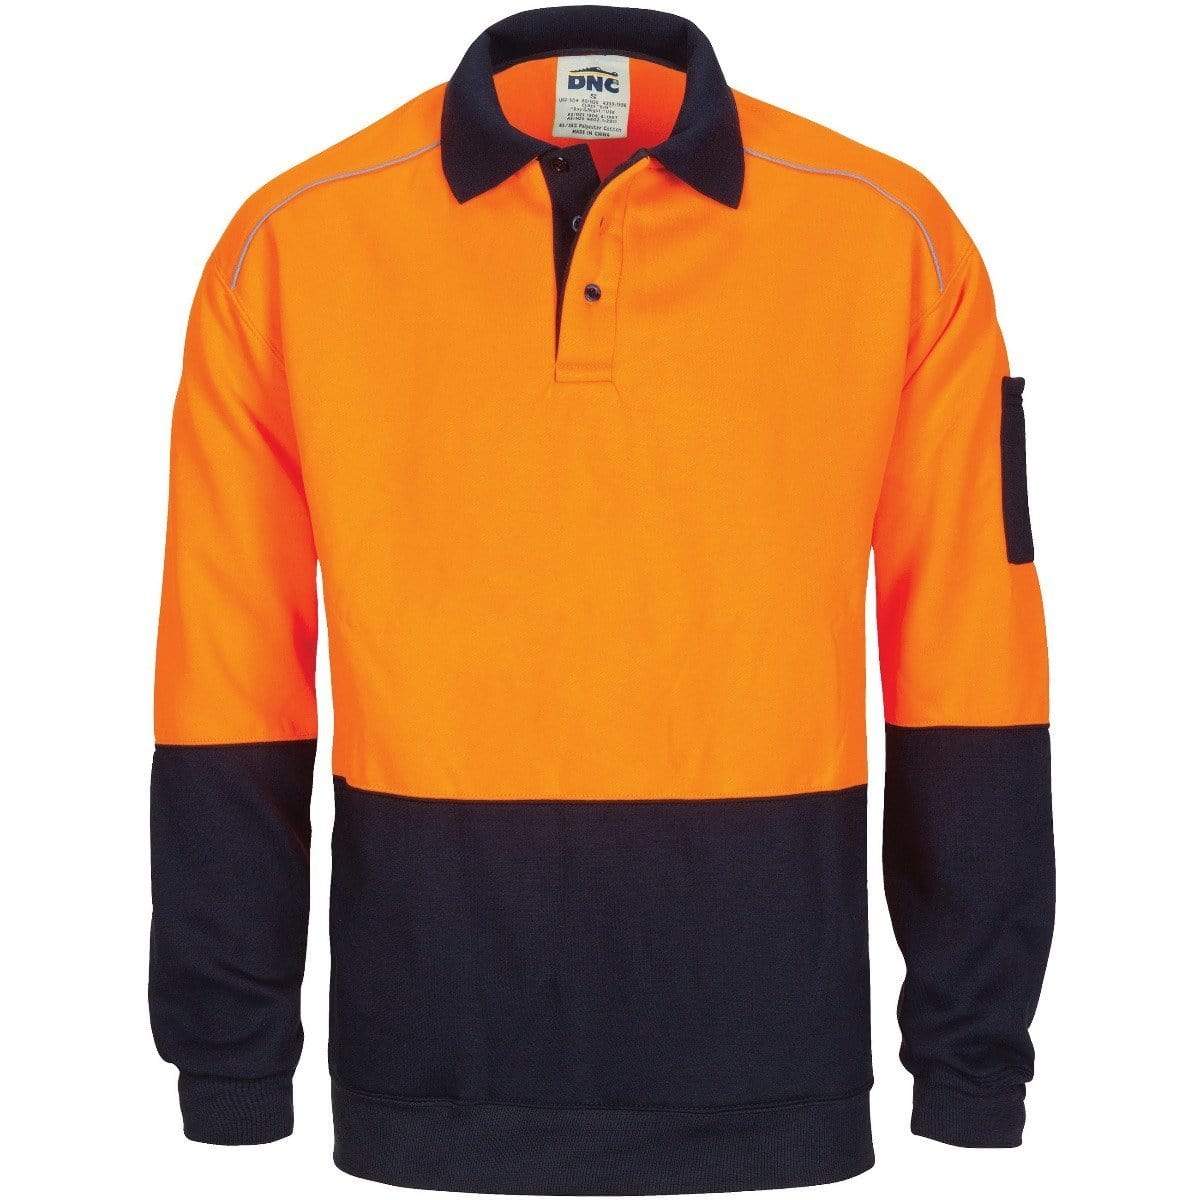 Dnc Workwear Hi-vis Rugby Top Windcheater With Two Side Zipped Pockets - 3727 Work Wear DNC Workwear Orange/Navy XS 